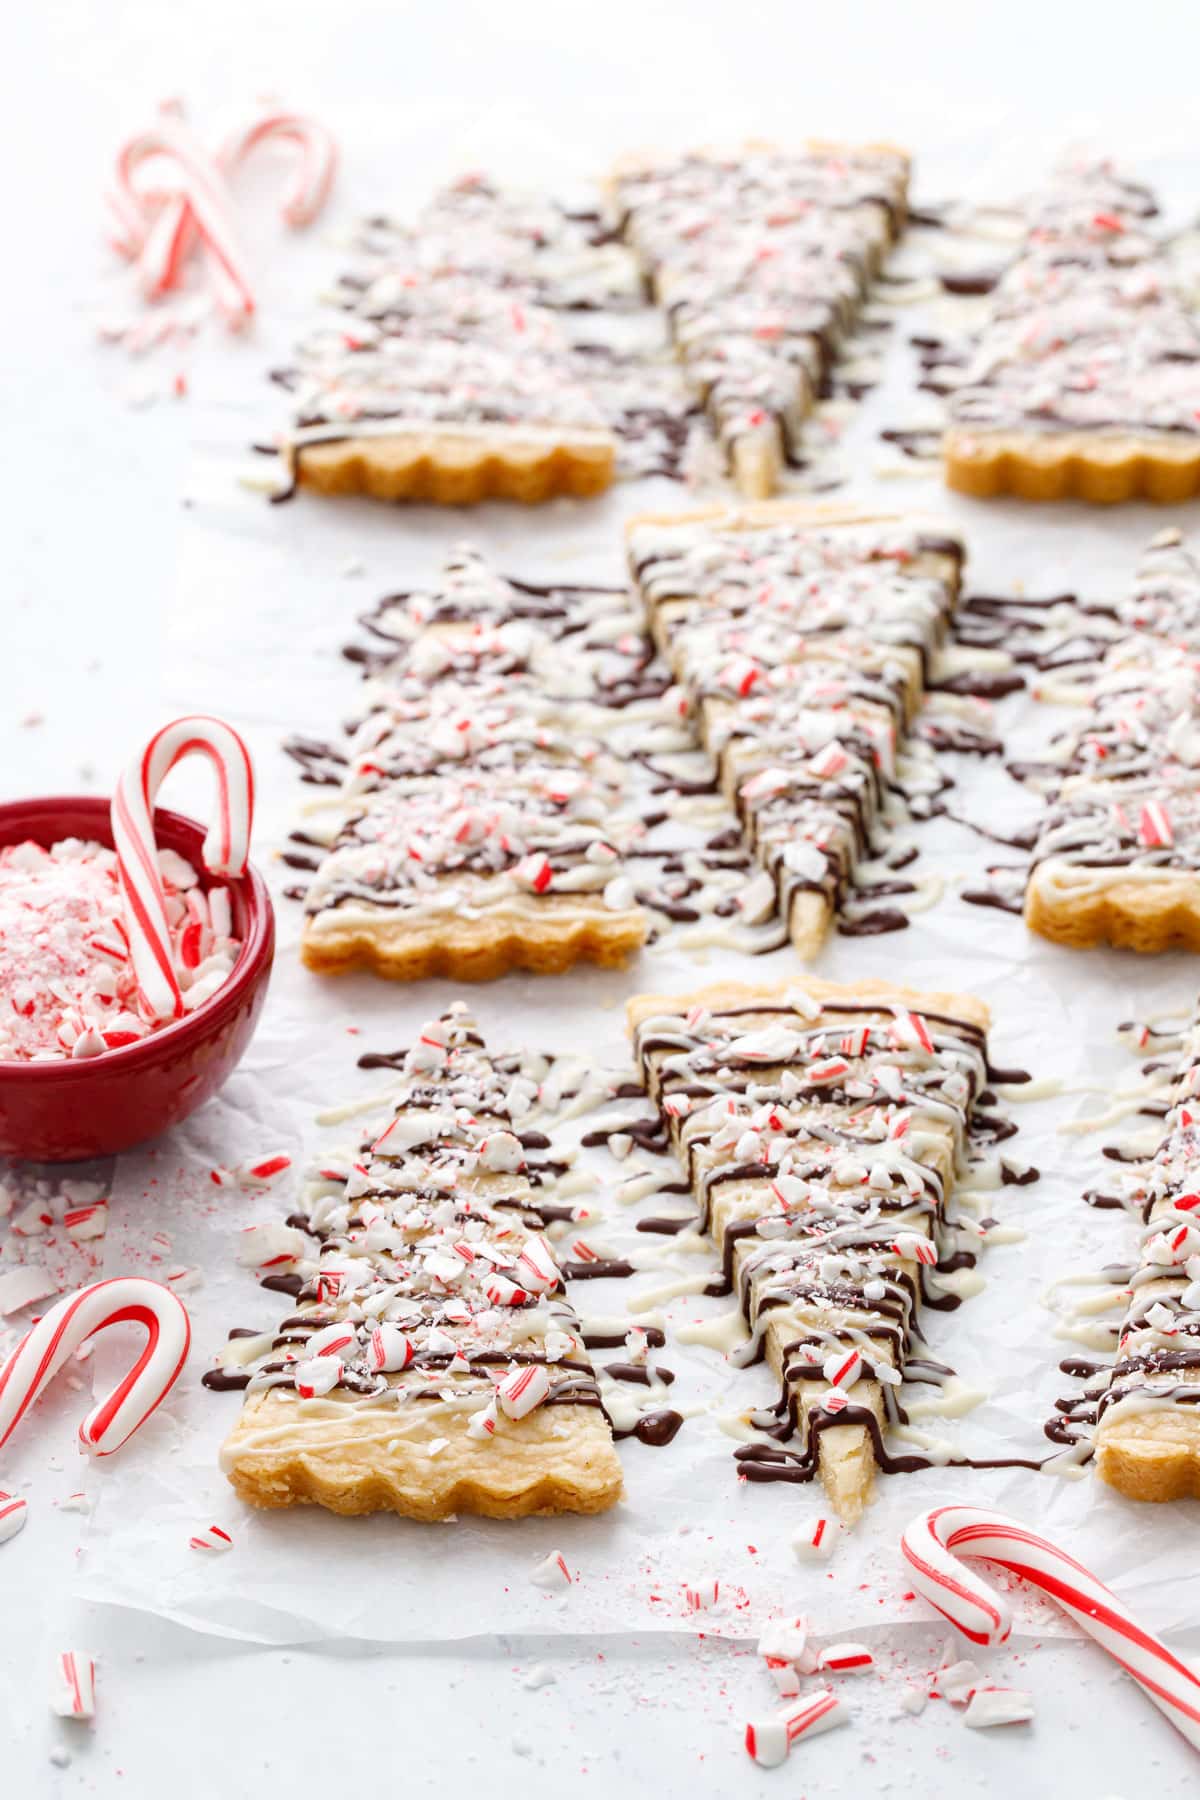 Rows of triangular Peppermint Bark Shortbread with white and dark chocolate drizzle and topped with crushed candy canes, and a red bowl of candy cane pieces and a few mini candy canes on the side.